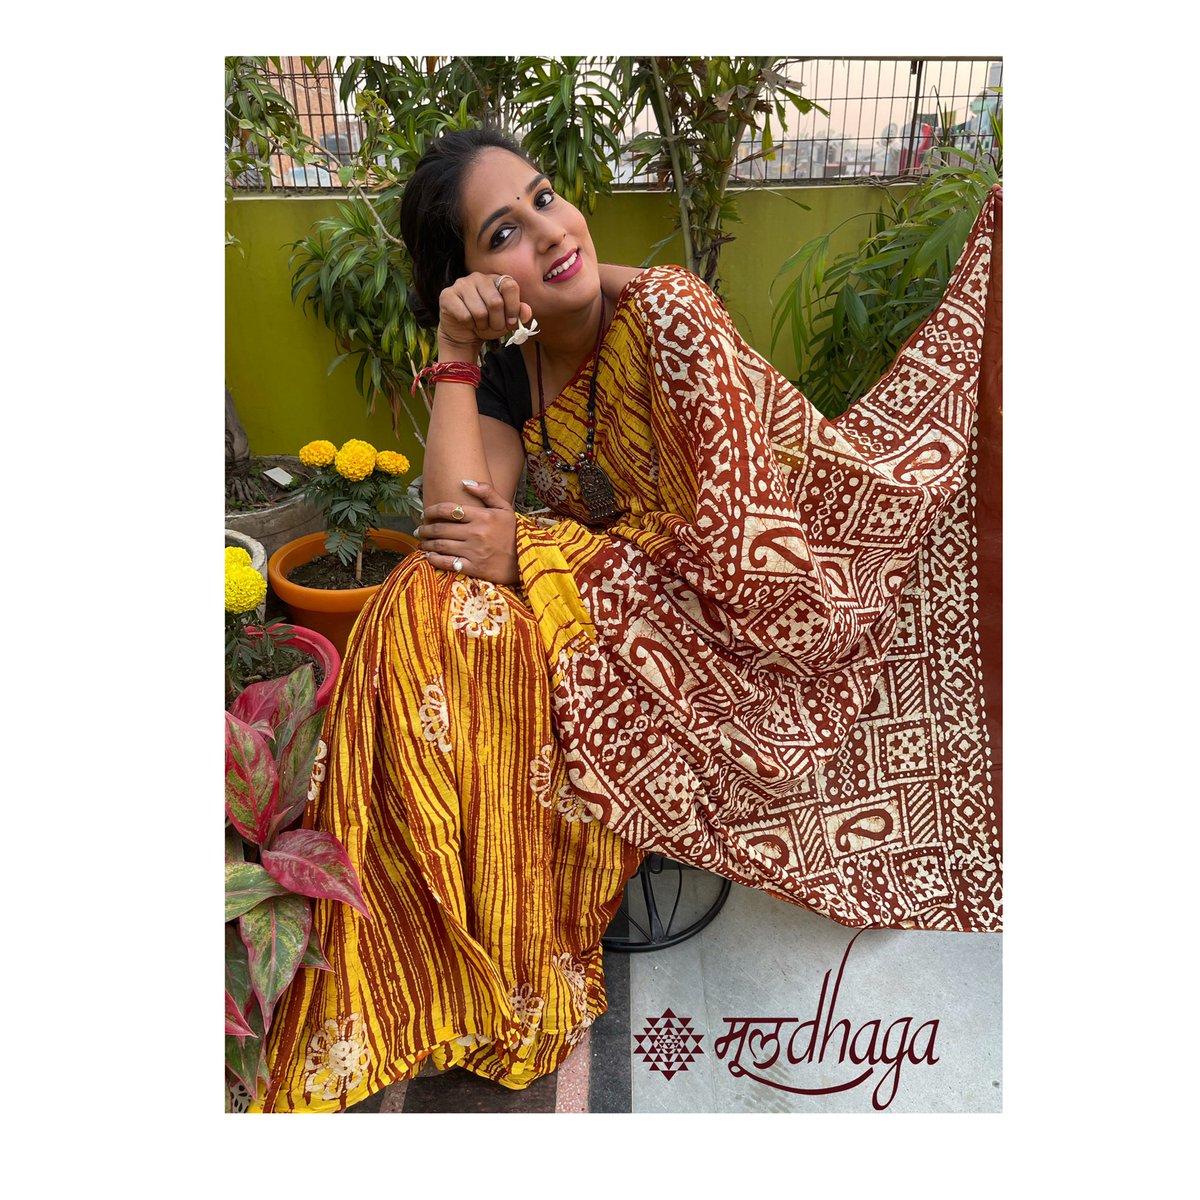 Pure Cotton Saree Handcrafted with batik print Art, direct from the heart of India Madhya Pardesh.

*limited stock* 
For orders DM or Whatsapp 9818771516 ! 

Follow @mooldhaga on instagram.

#Vocal4Local #Handcraft #BatikArt